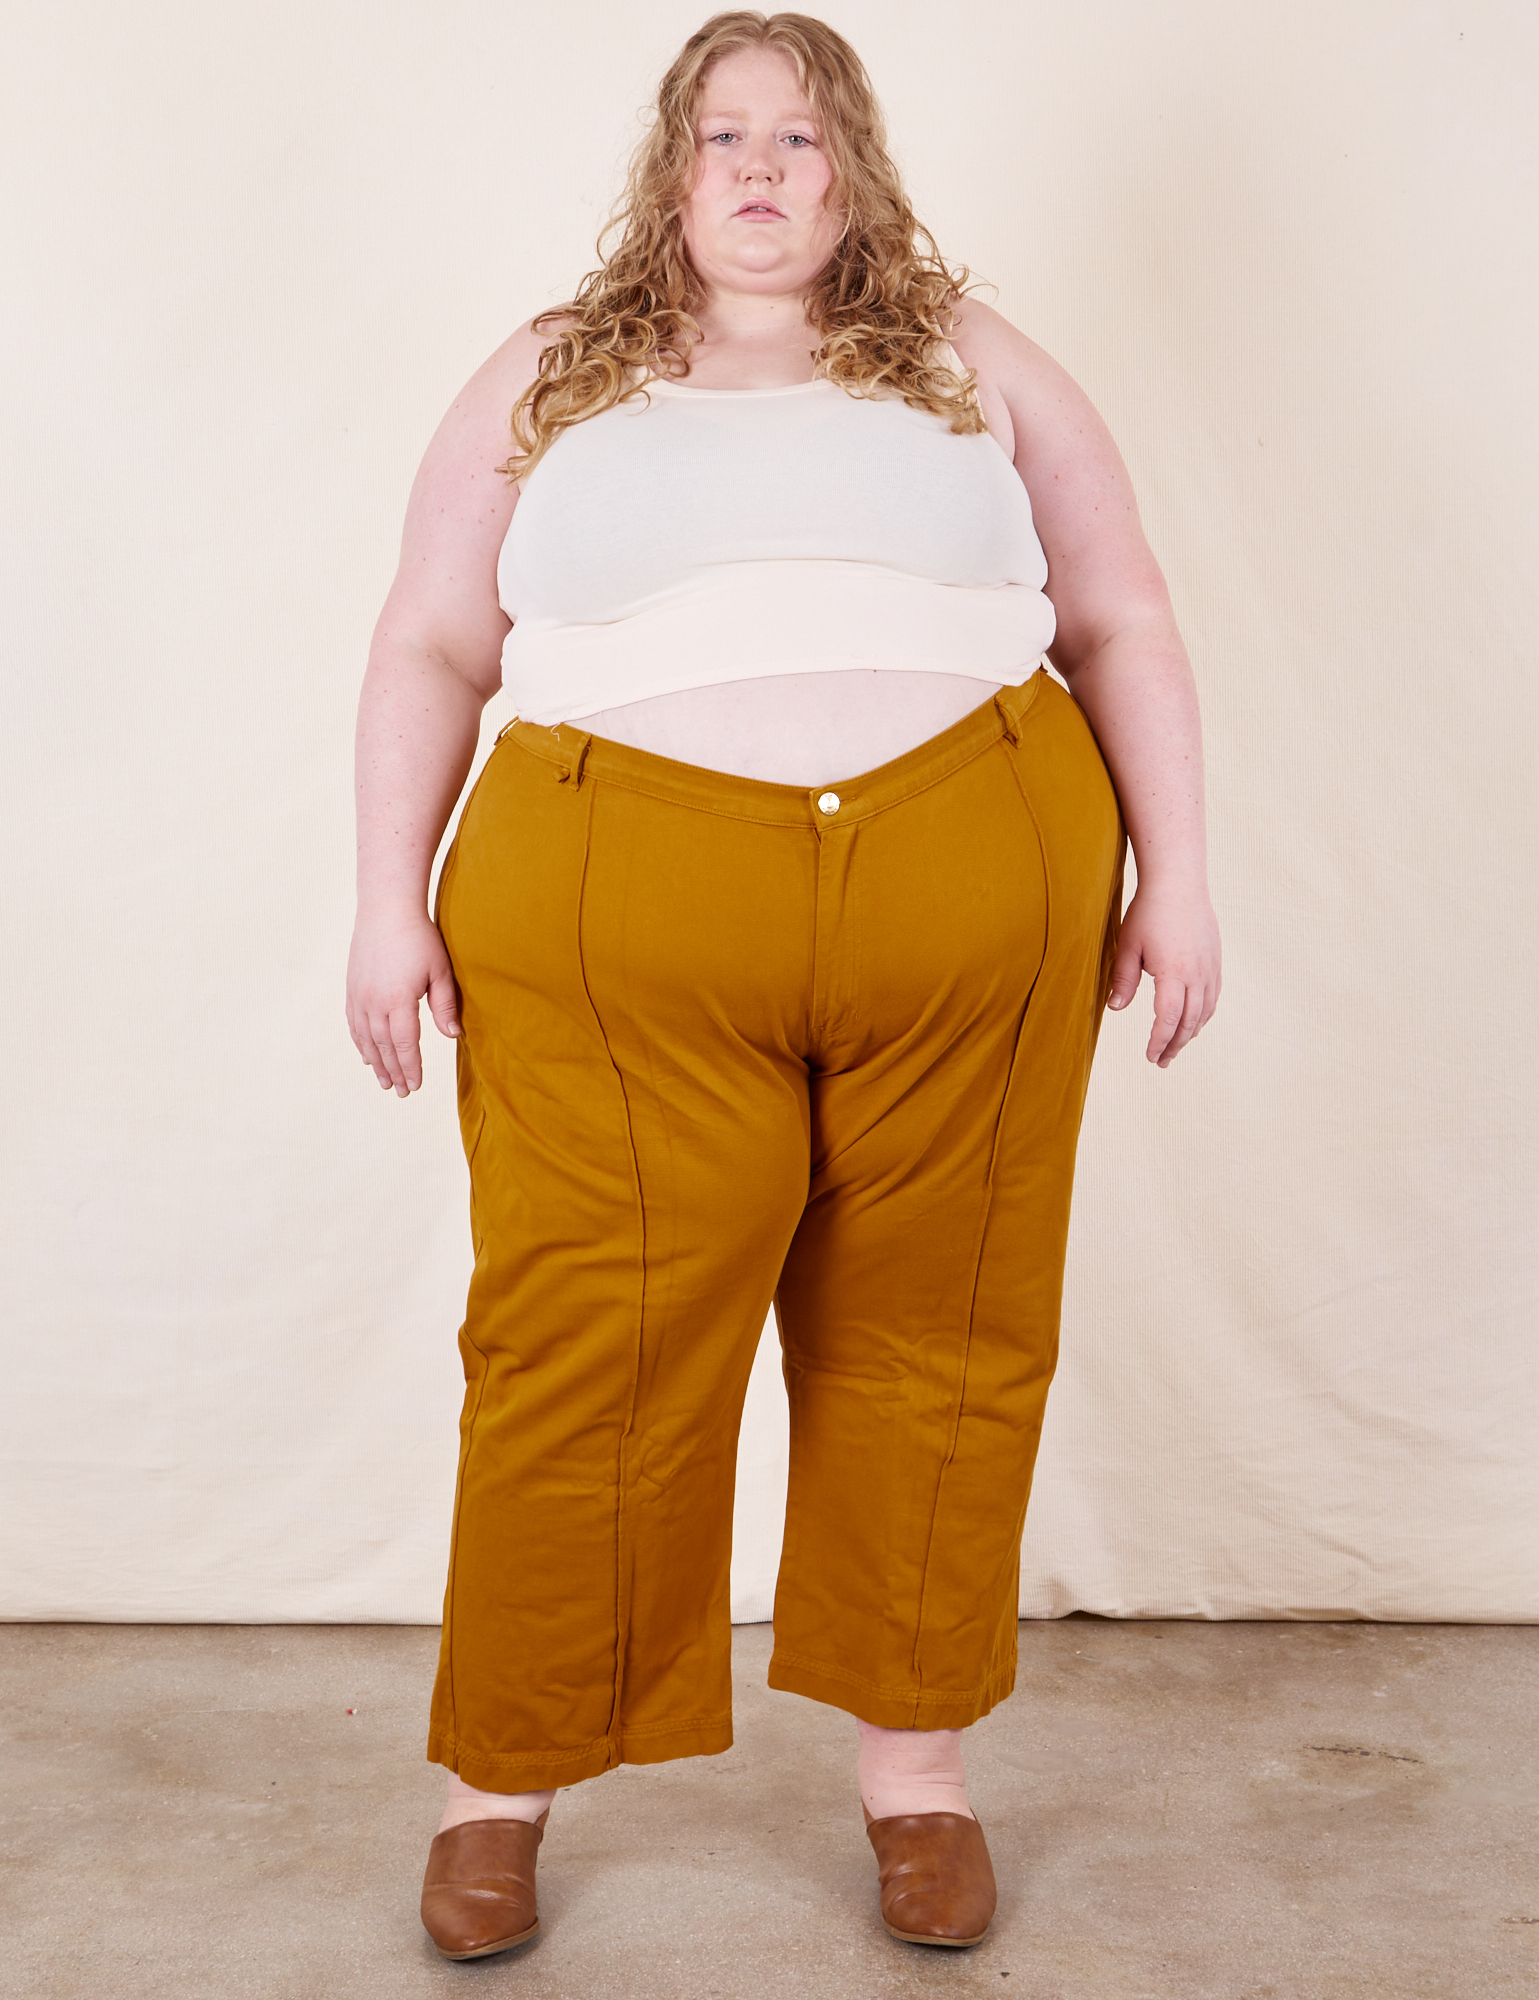 Catie is 5&#39;11&quot; and wearing 5XL Western Pants in Spicy Mustard paired with vintage off-white Tank Top